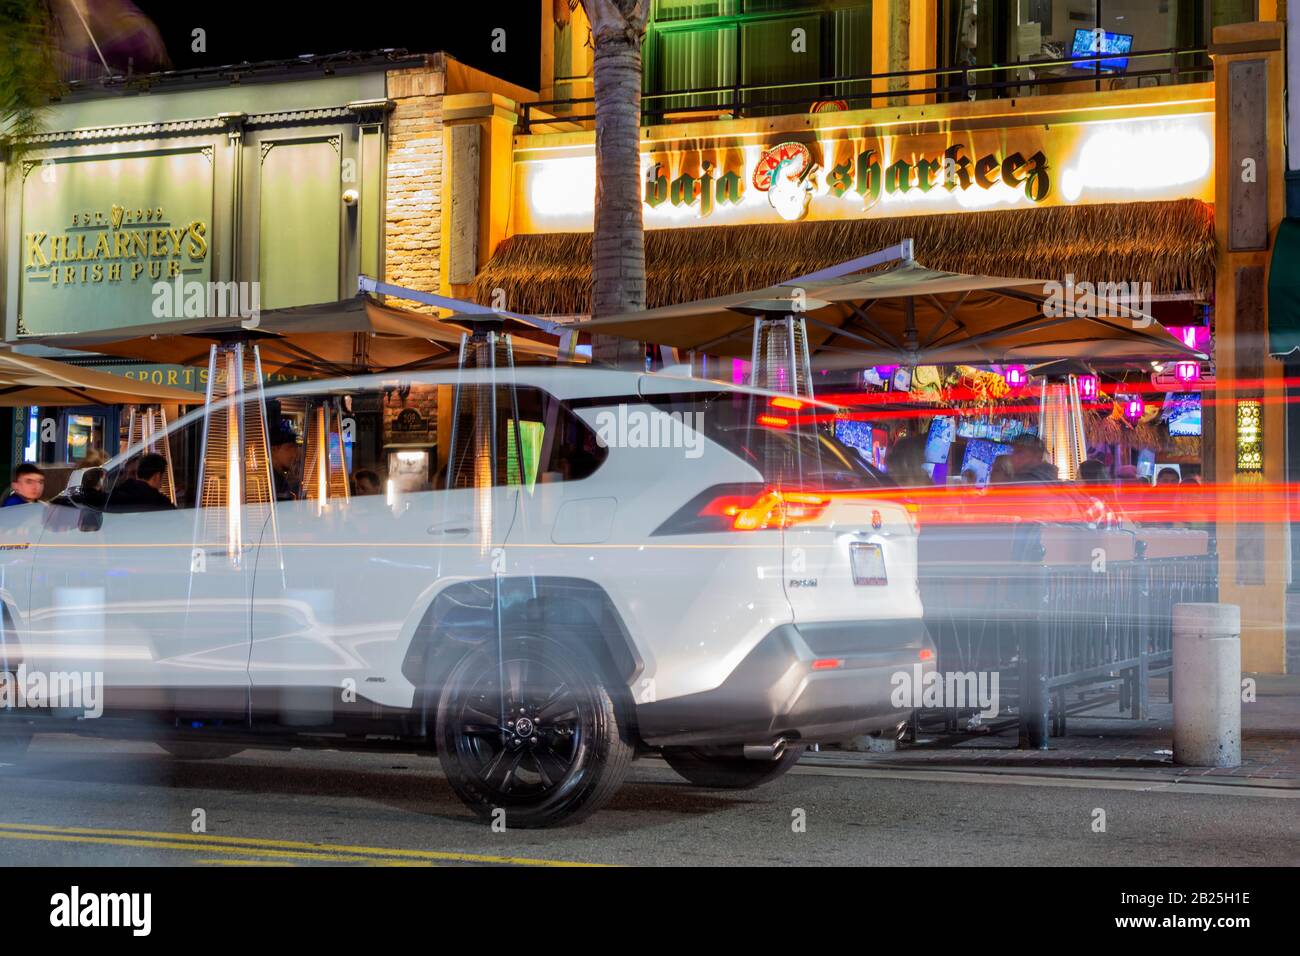 People having a fantastic time at restaurants and bars on a Saturday night on Main Street in Huntington Beach, with light trails and a ghosted car. Stock Photo